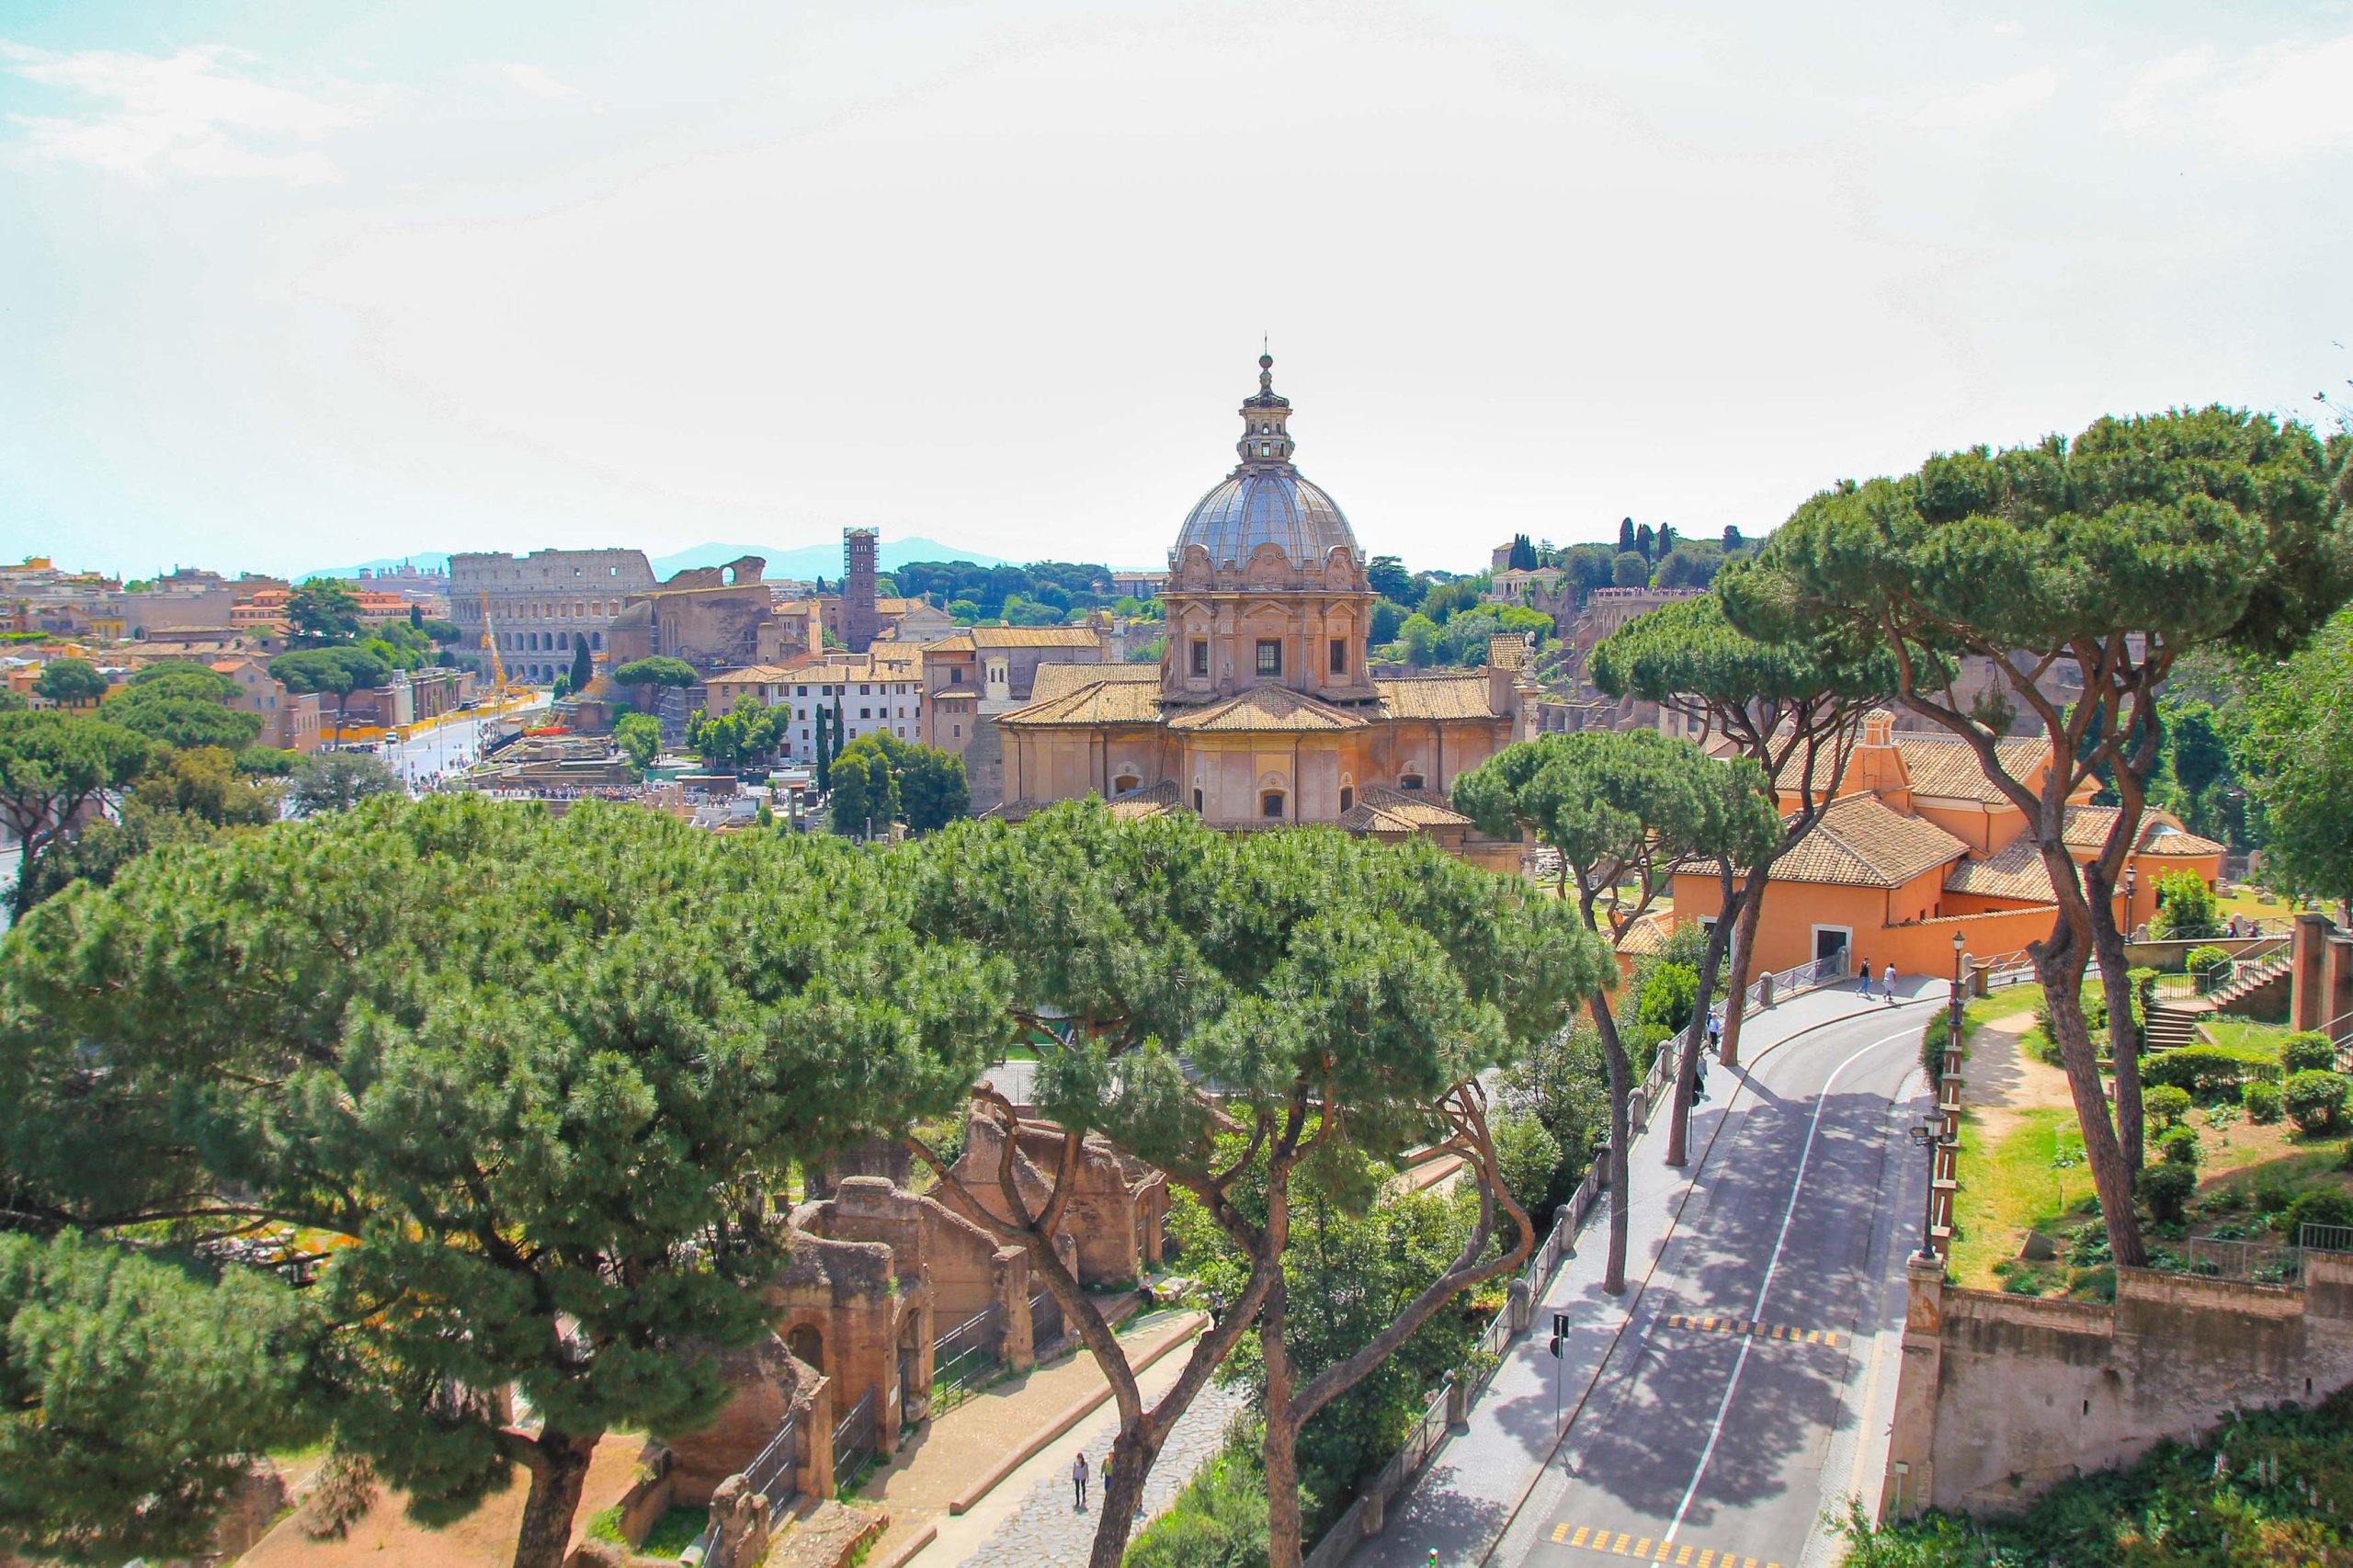 Monti District, Ancient Rome, Colosseum, Where to stay in Rome